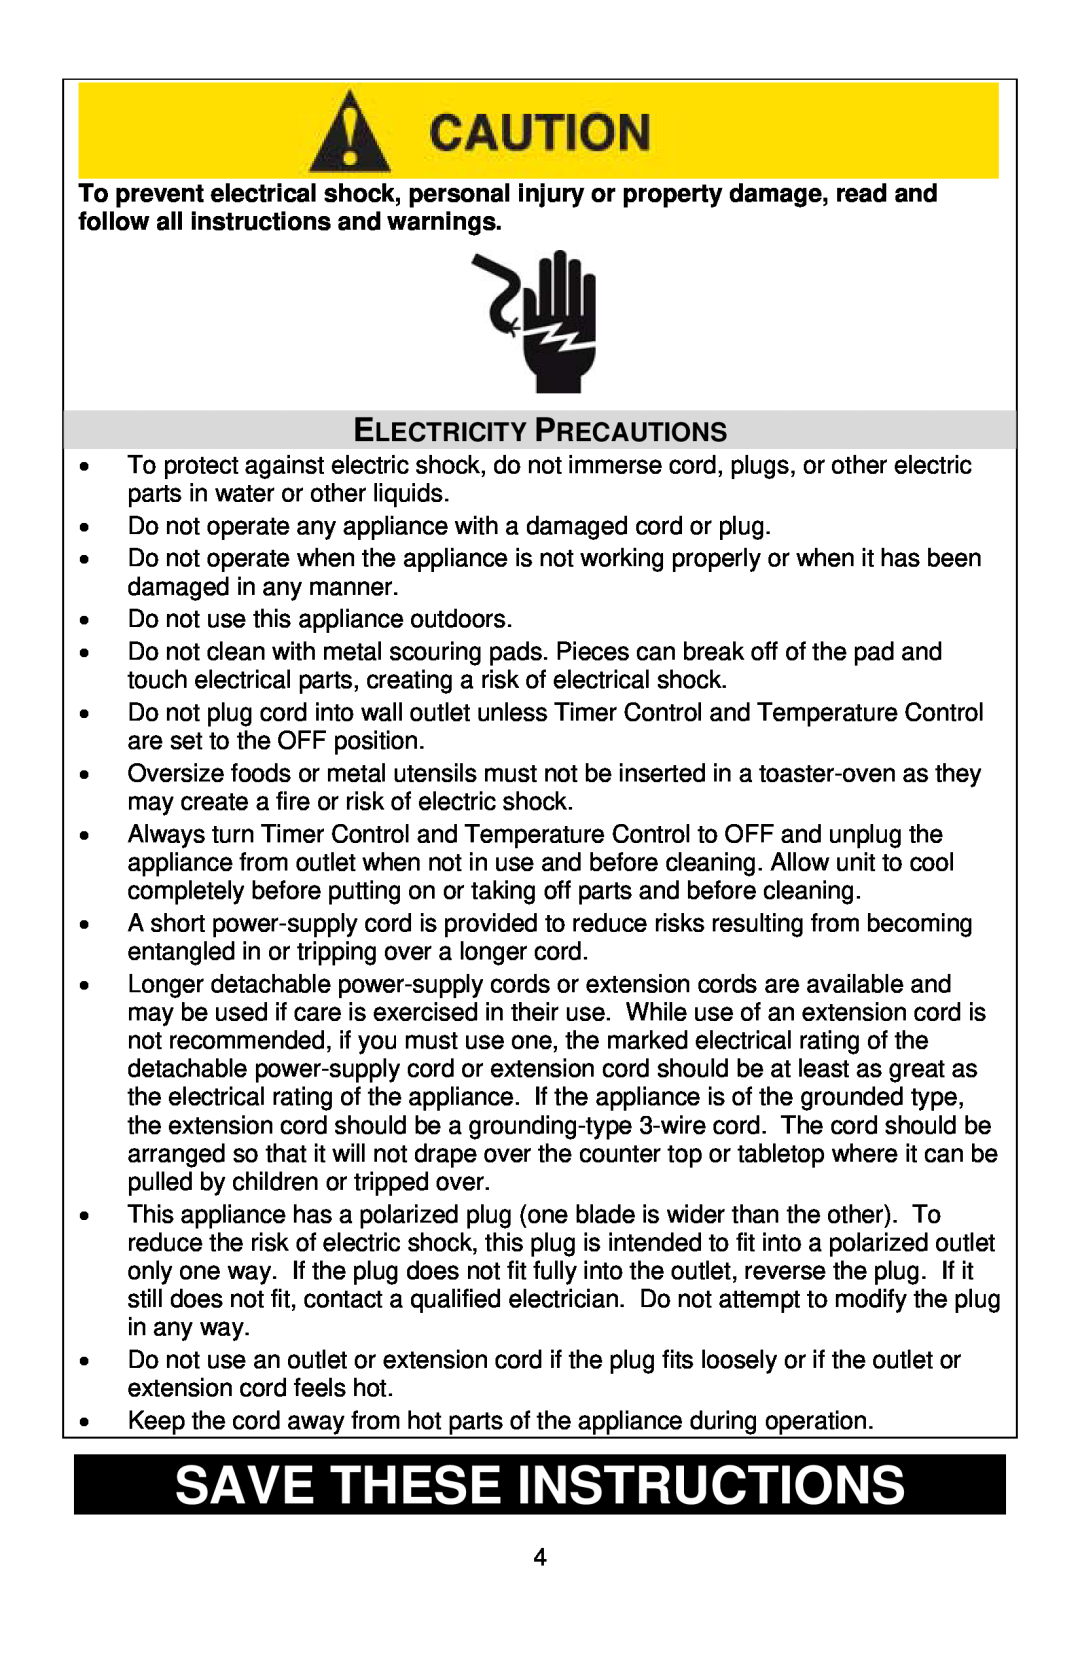 West Bend SHTO100, L5704 instruction manual Save These Instructions, Electricity Precautions 